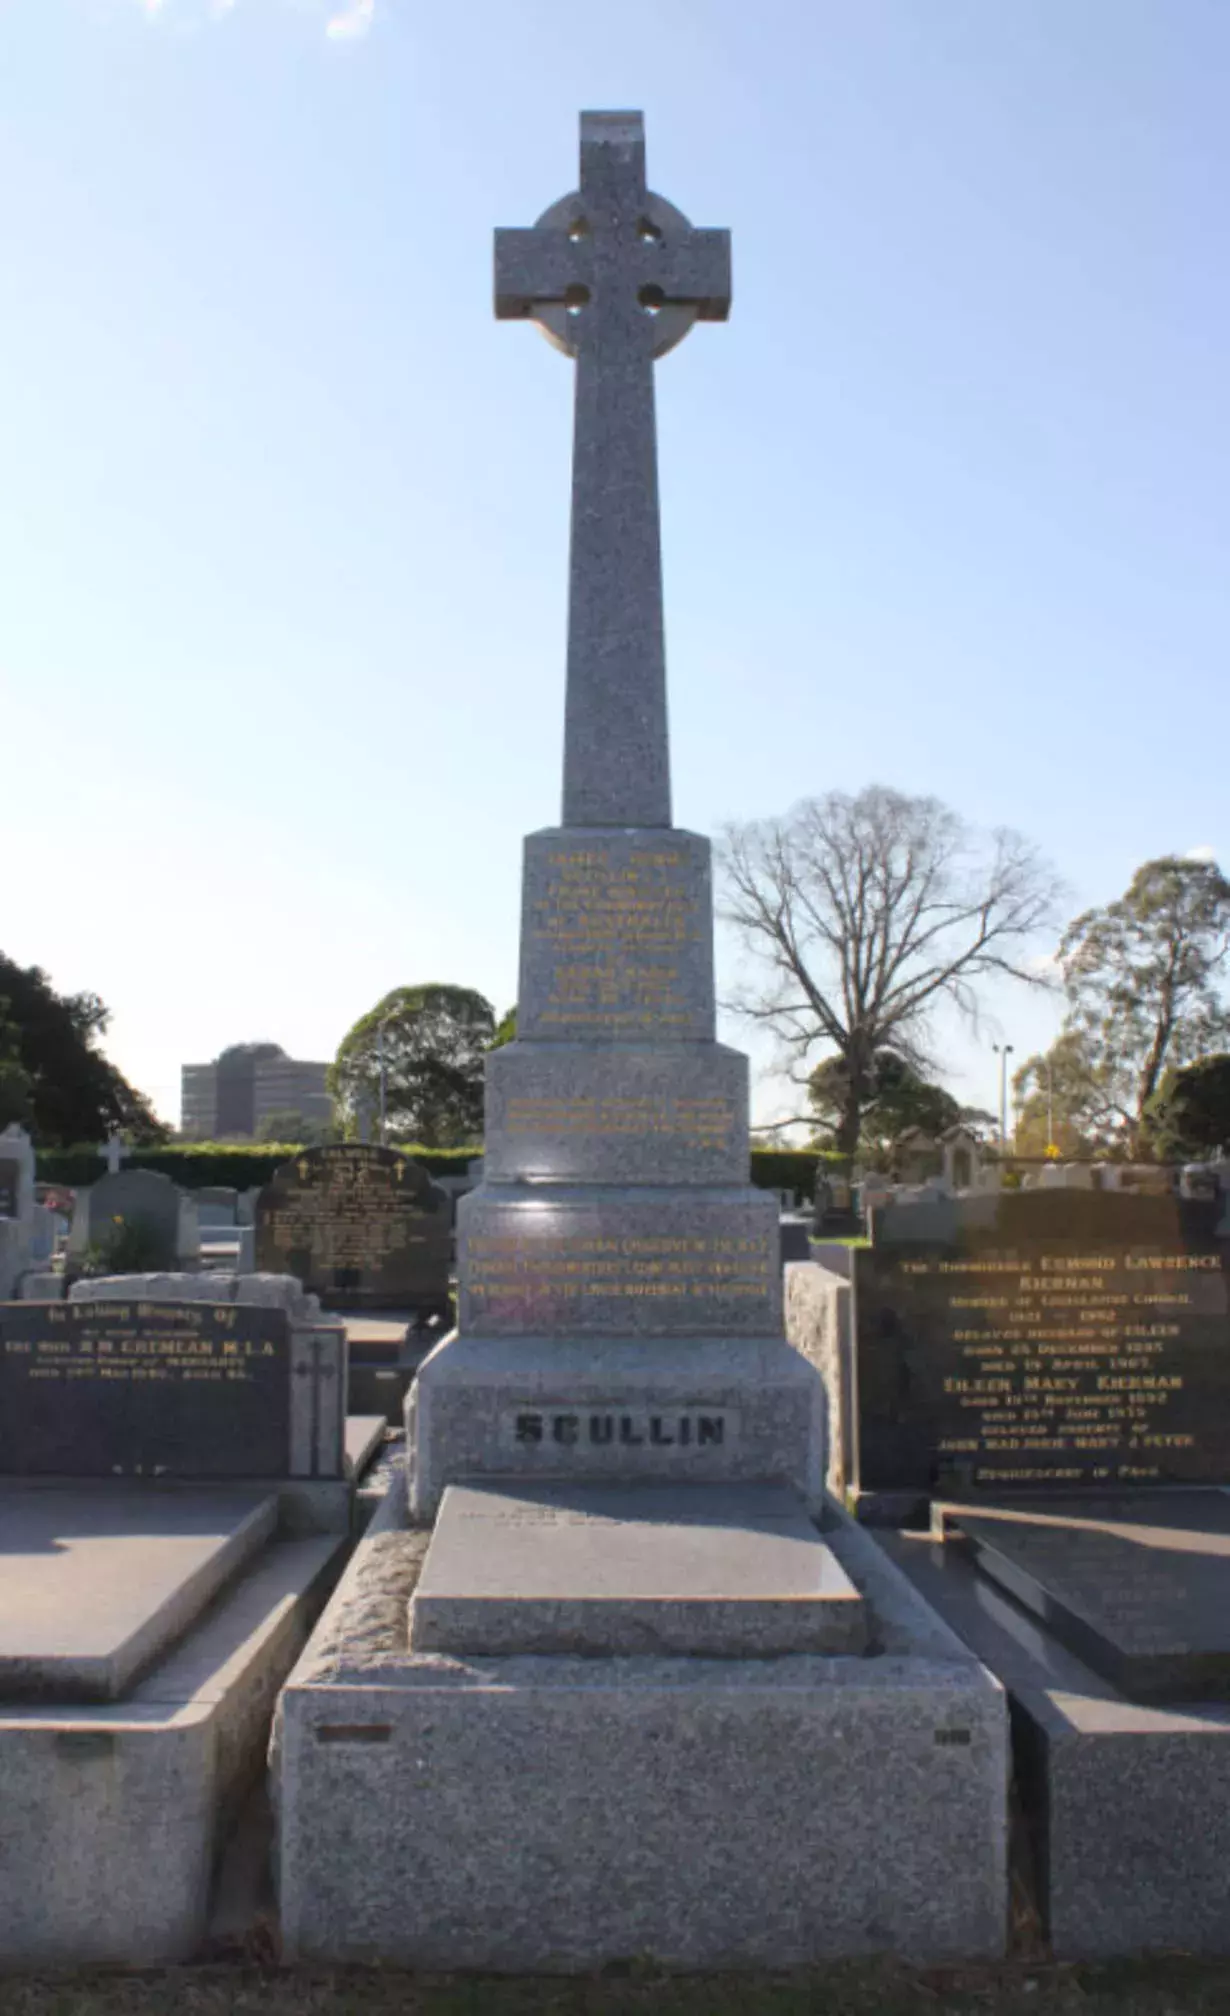 A stone monument in a cemetery with a square based and a tier of smaller stone layers leads to a a large cross. Words that can't be read are inscribed in gold. At the base of the monument is the engraved word 'Scullin'. 